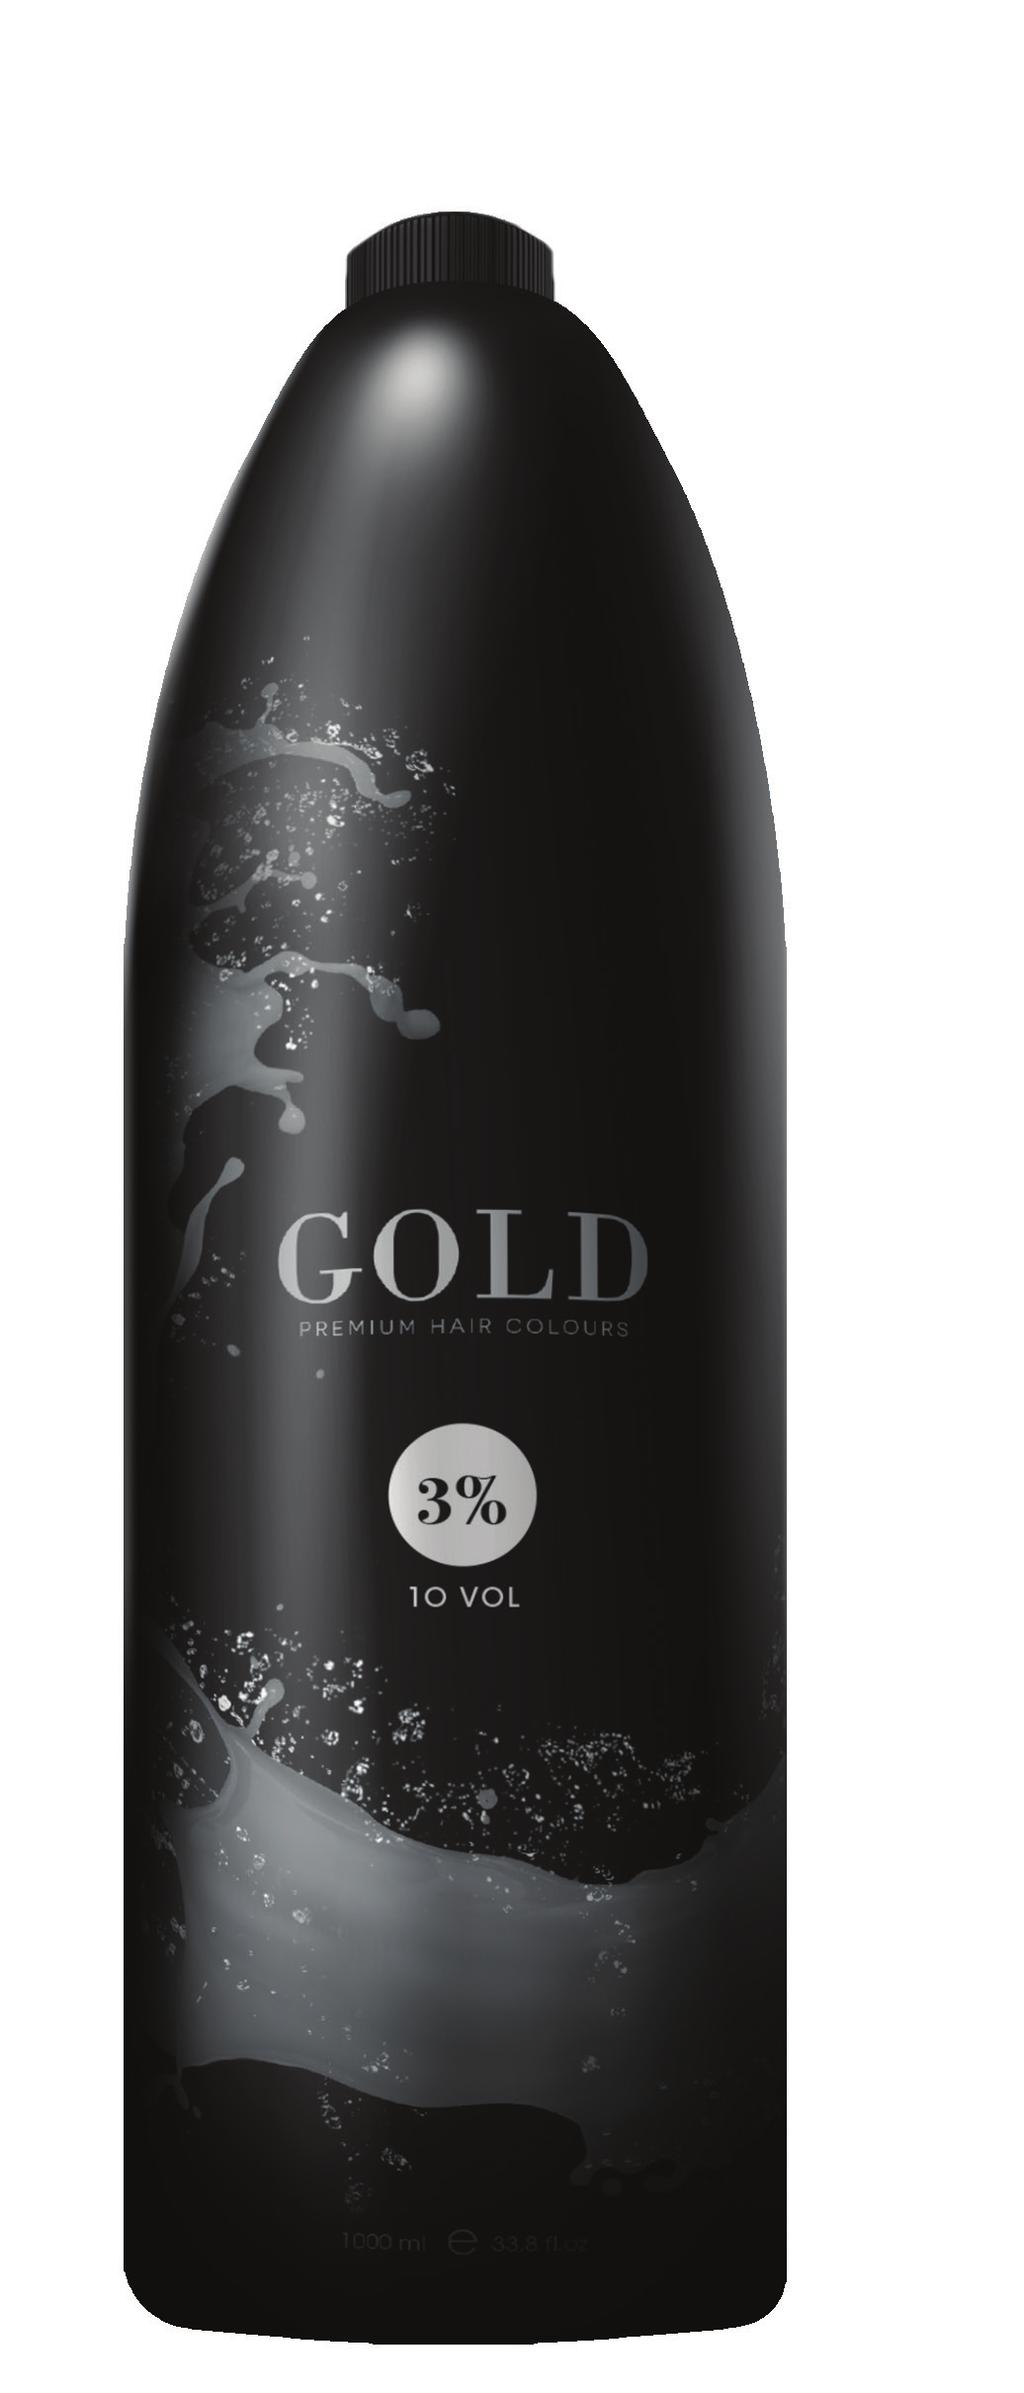 GOLD HAIR PEROXIDE CREAMY STABILIZED HYDROGEN PEROXIDE Formula enriched with Elicos, it buffers the colour s alkalinity, making it milder on the scalp.